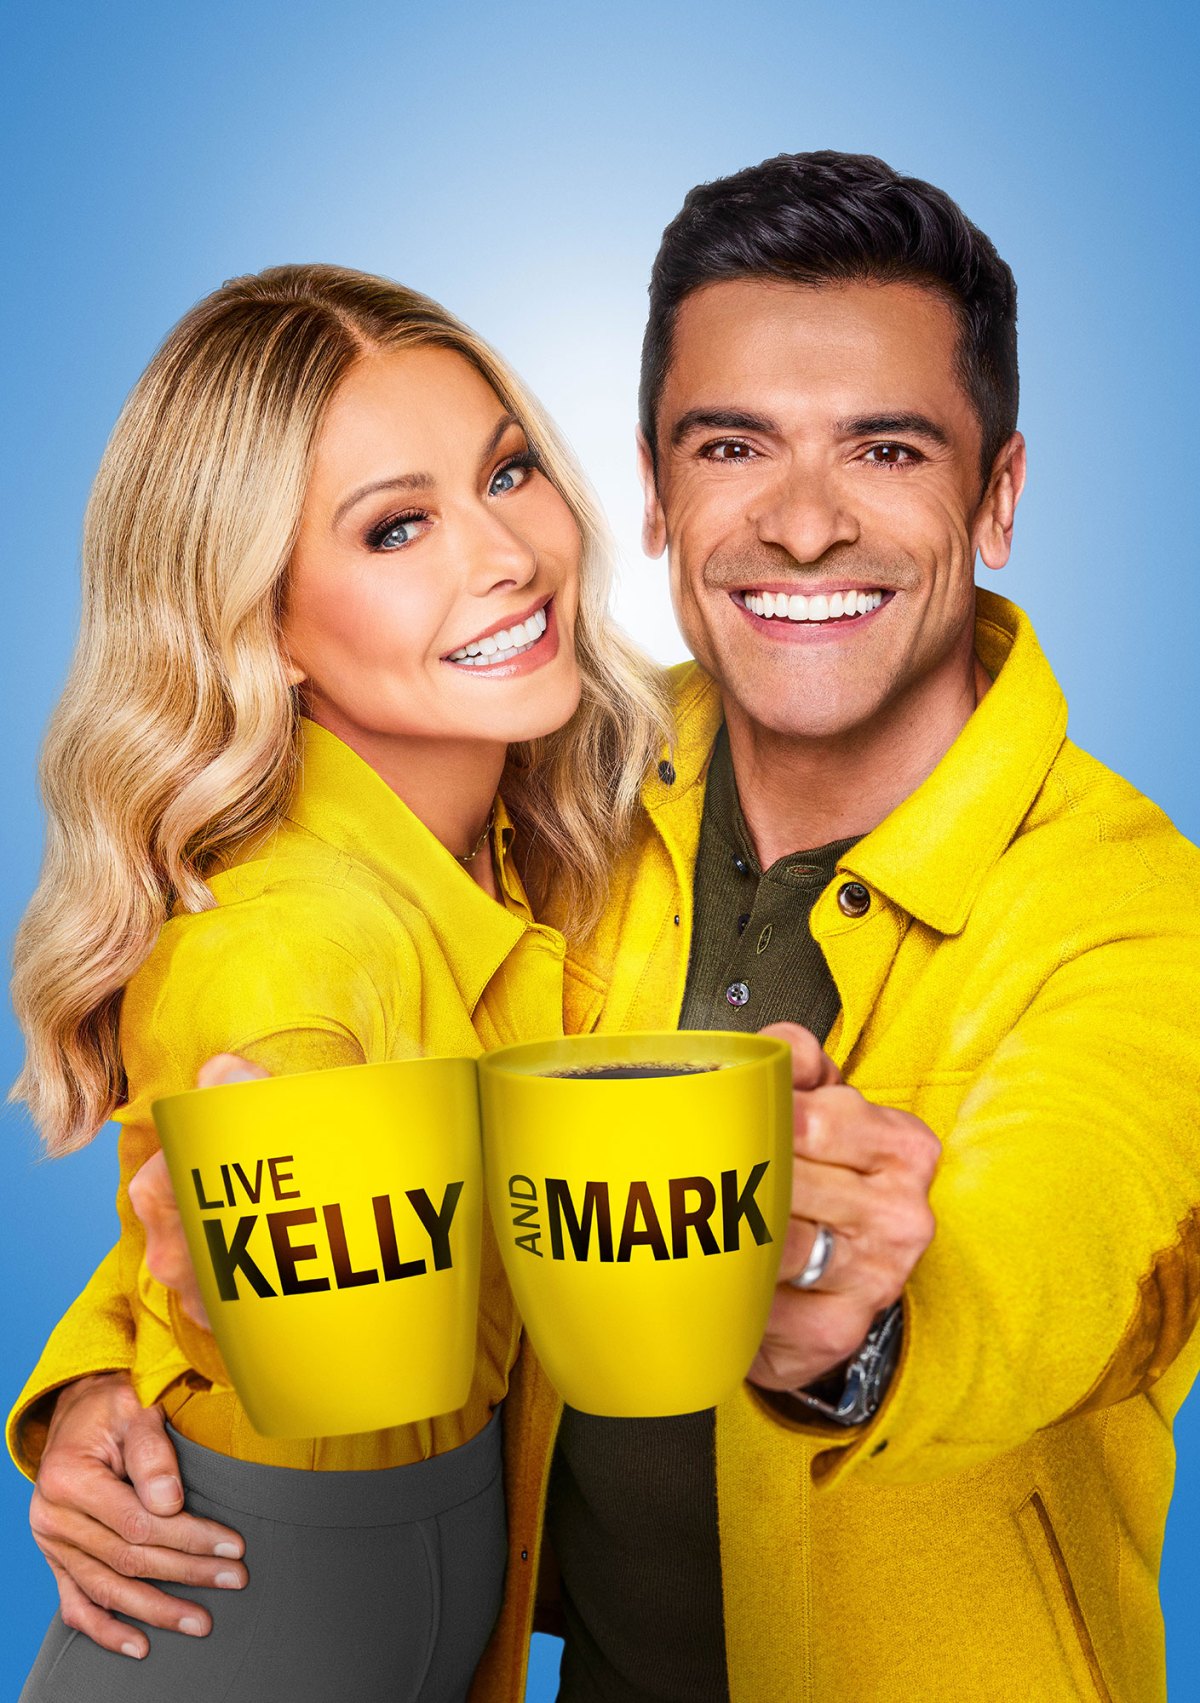 Headline Guest Lineup for ‘Live With Kelly and Mark,’ Sept. 7-8